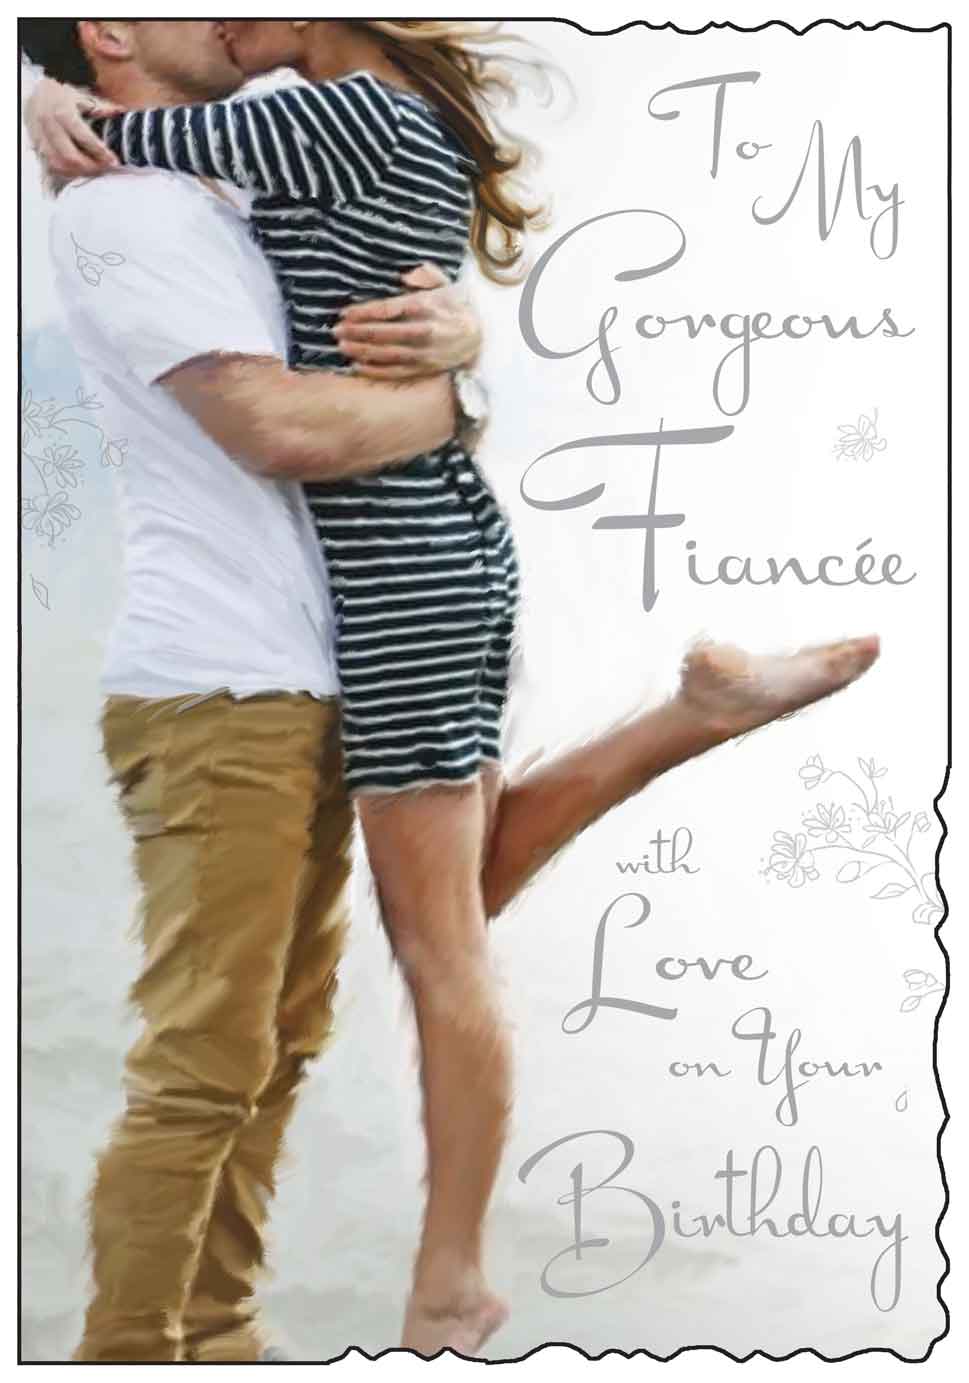 Fiancée Birthday Card - Madly In Love